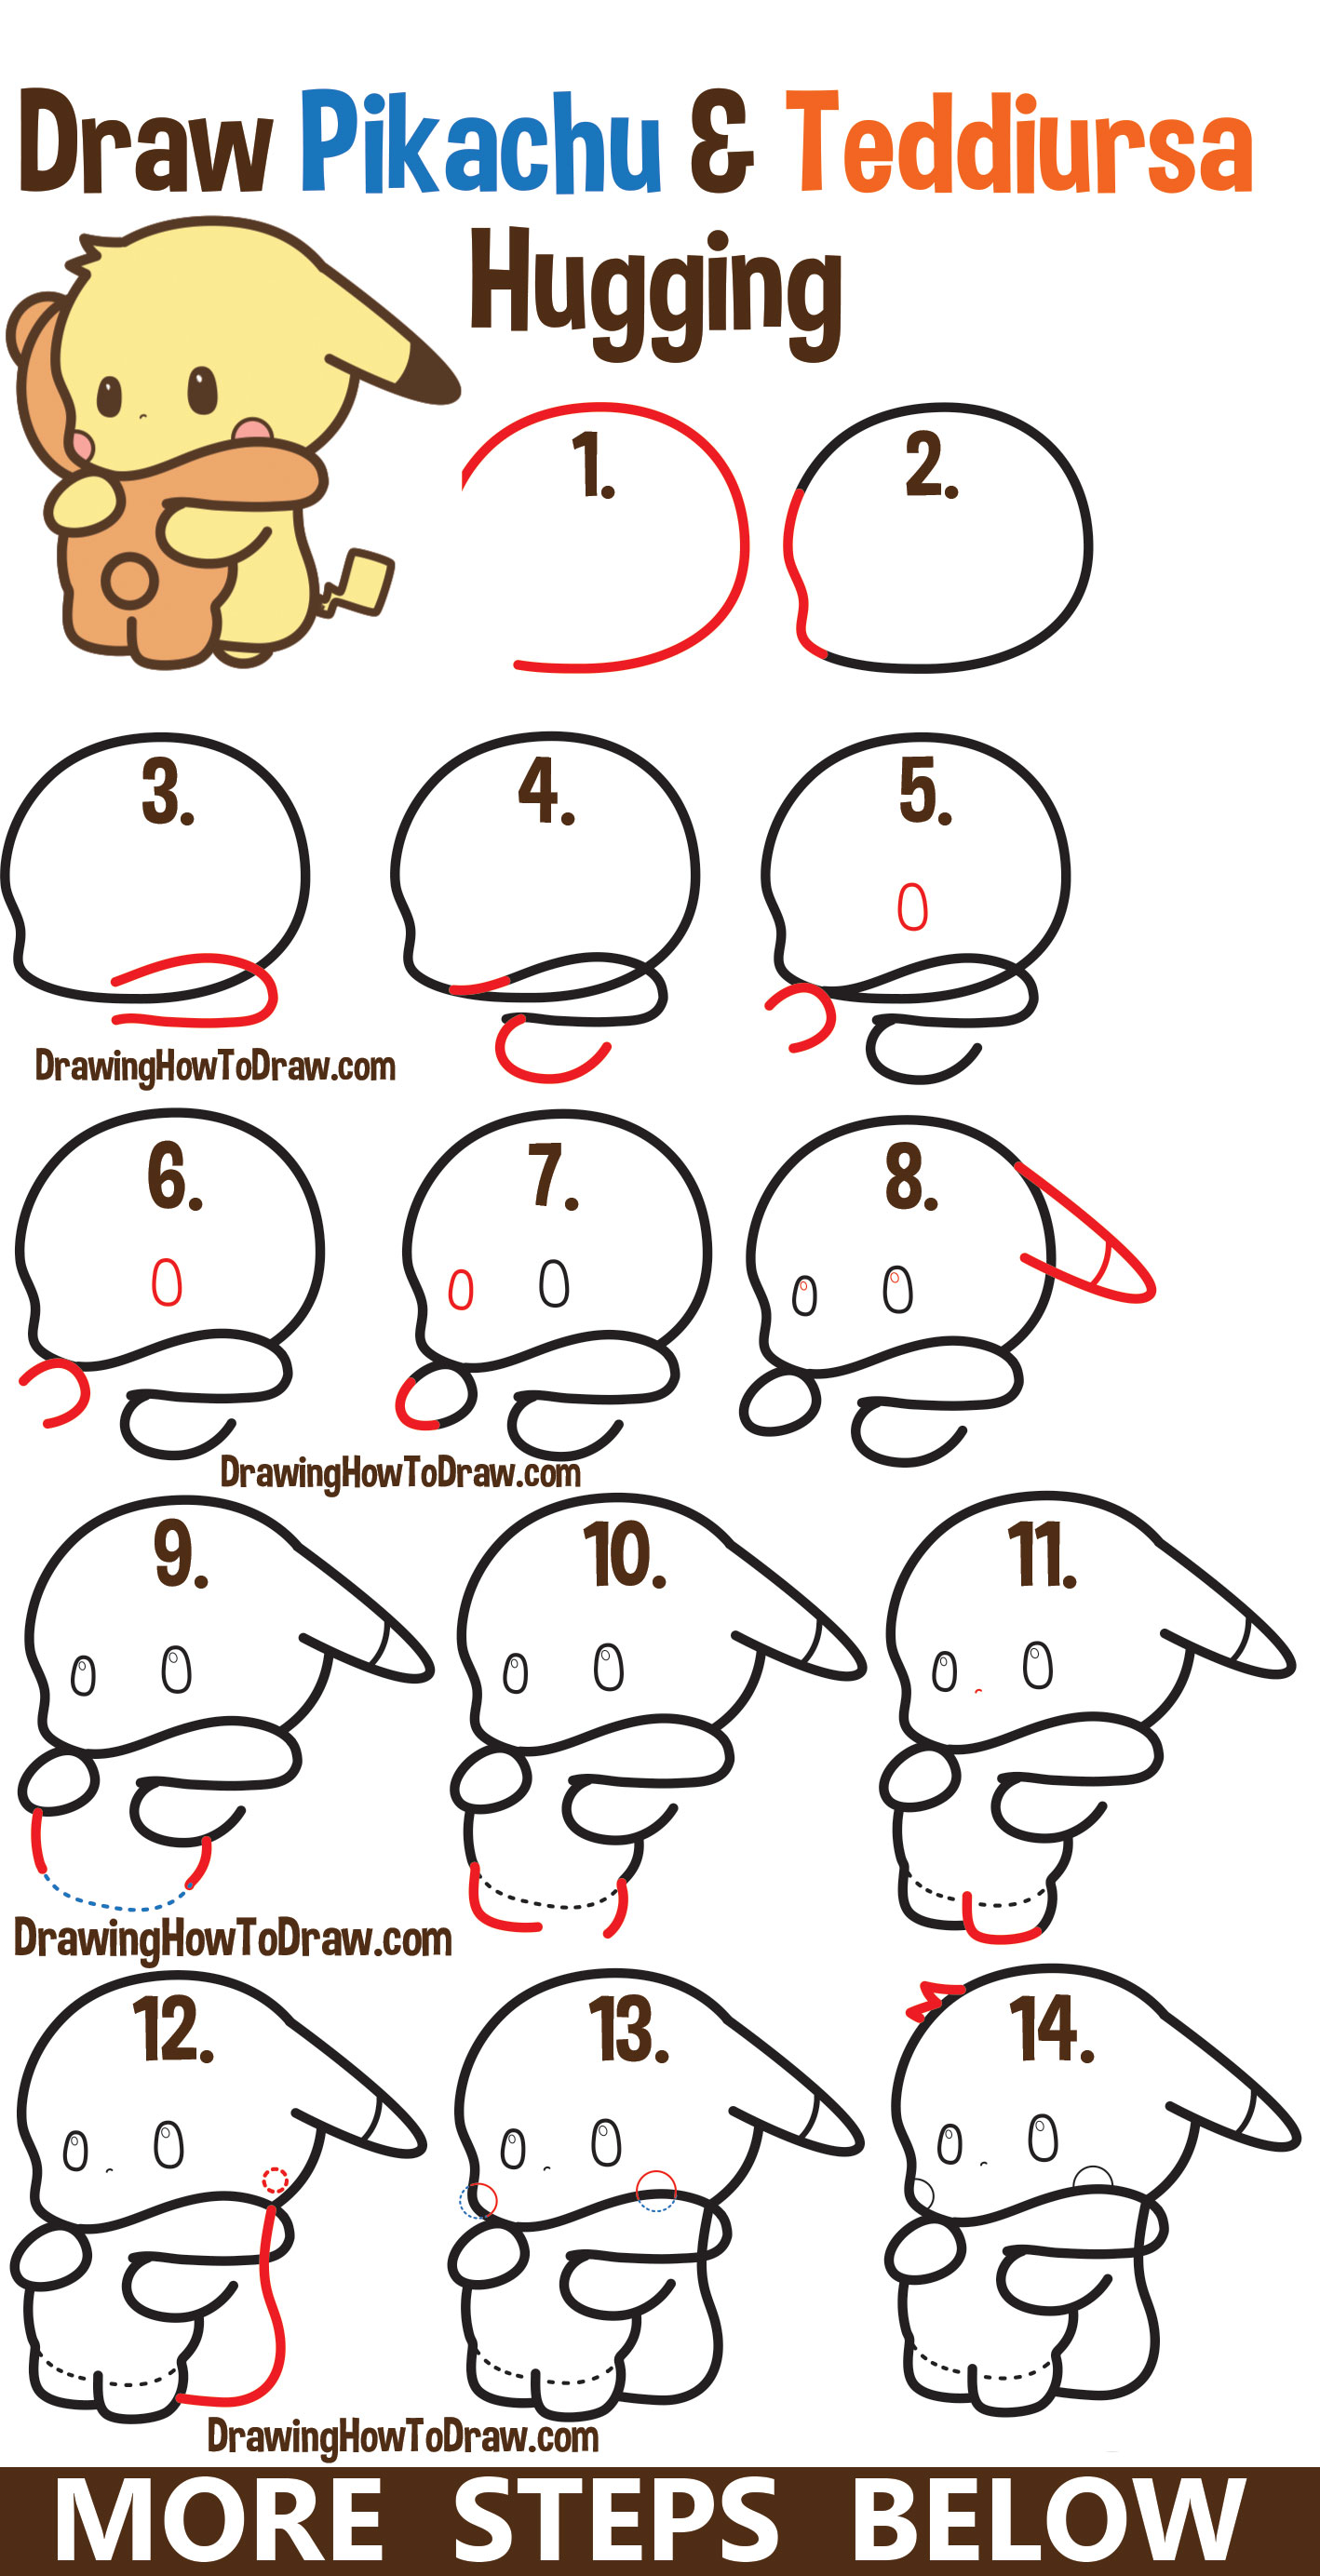 How To Draw Pikachu Step By Step Easy / Creature design is spot on.